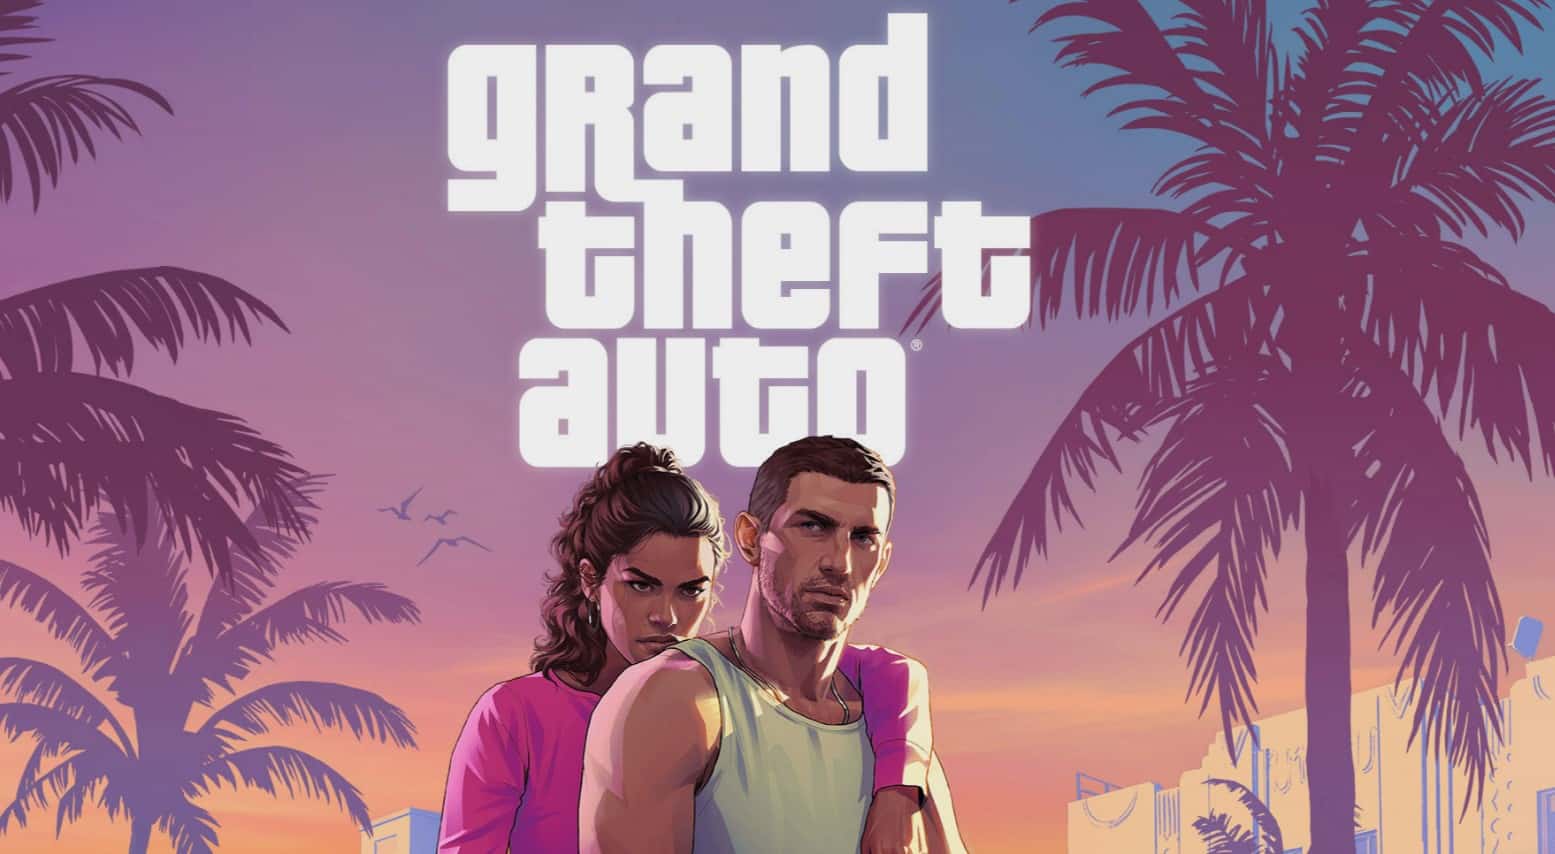 Tommy Vercetti’s Return: Why a Vice City Cameo in GTA 6 Is More Likely Than Ever